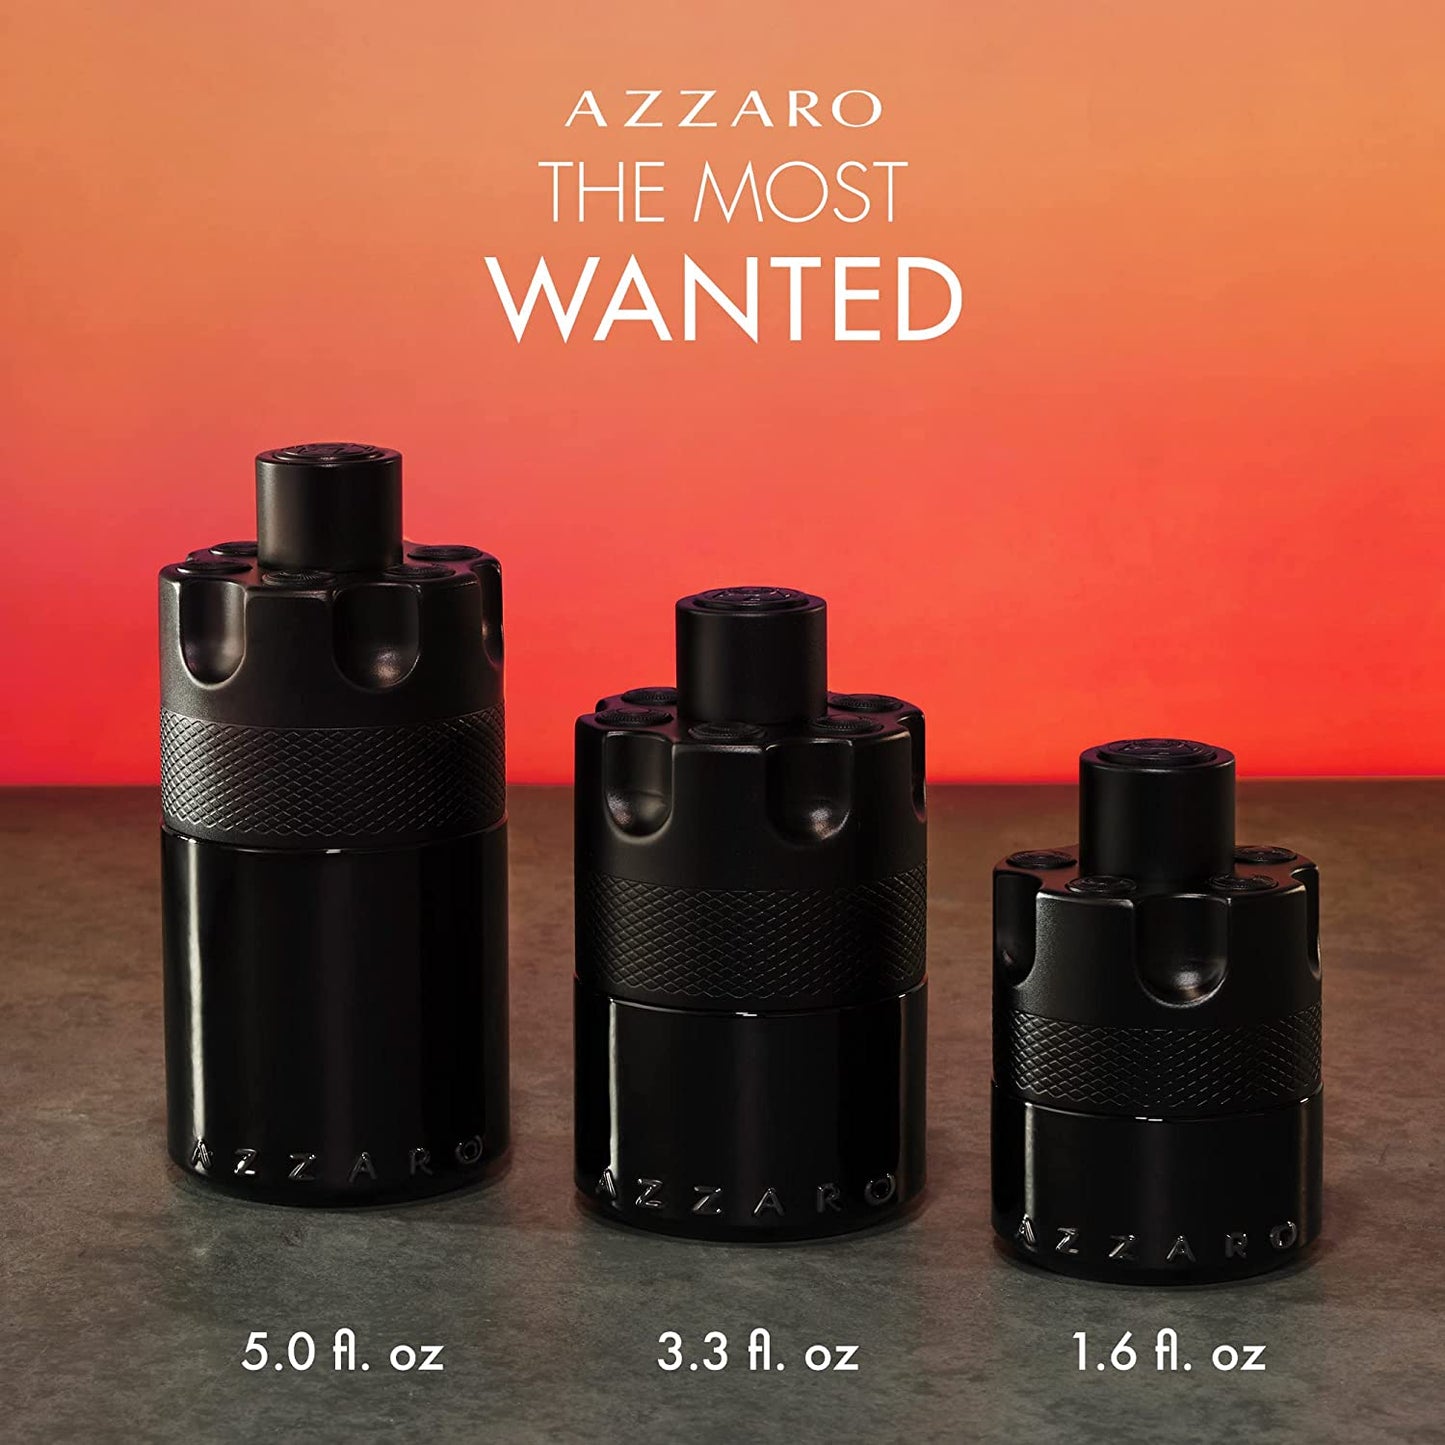 Azzaro The Most Wanted Eau de Parfum Intense - Seductive Mens Cologne - Fougère, Ambery & Spicy Fragrance for Date - Lasting Wear - Luxury Perfumes for Men